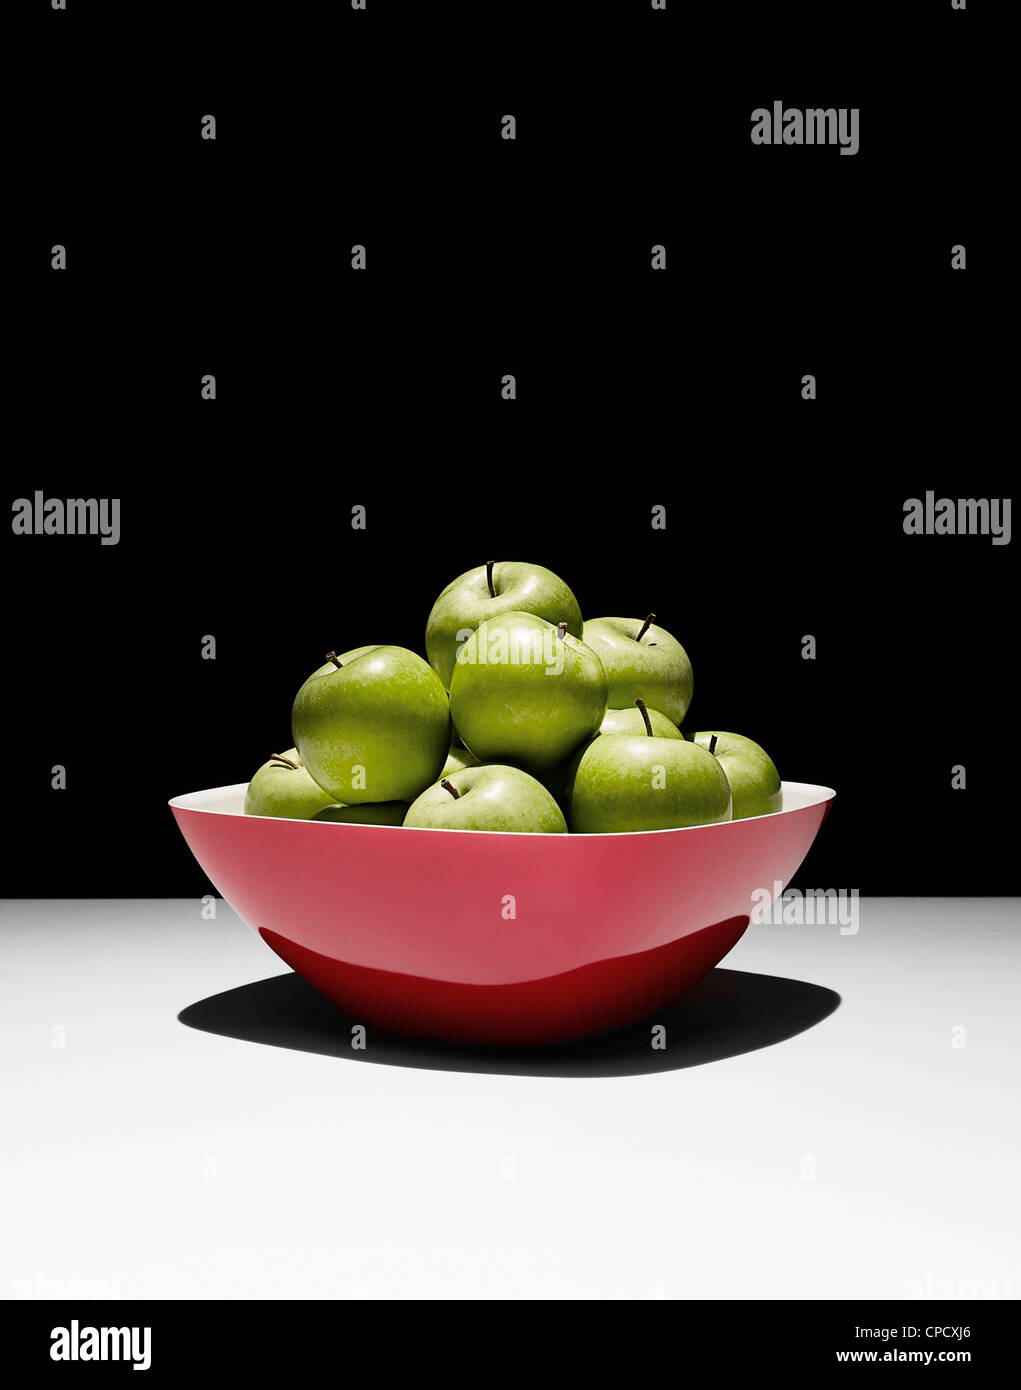 Bowl of green apples on table Stock Photo